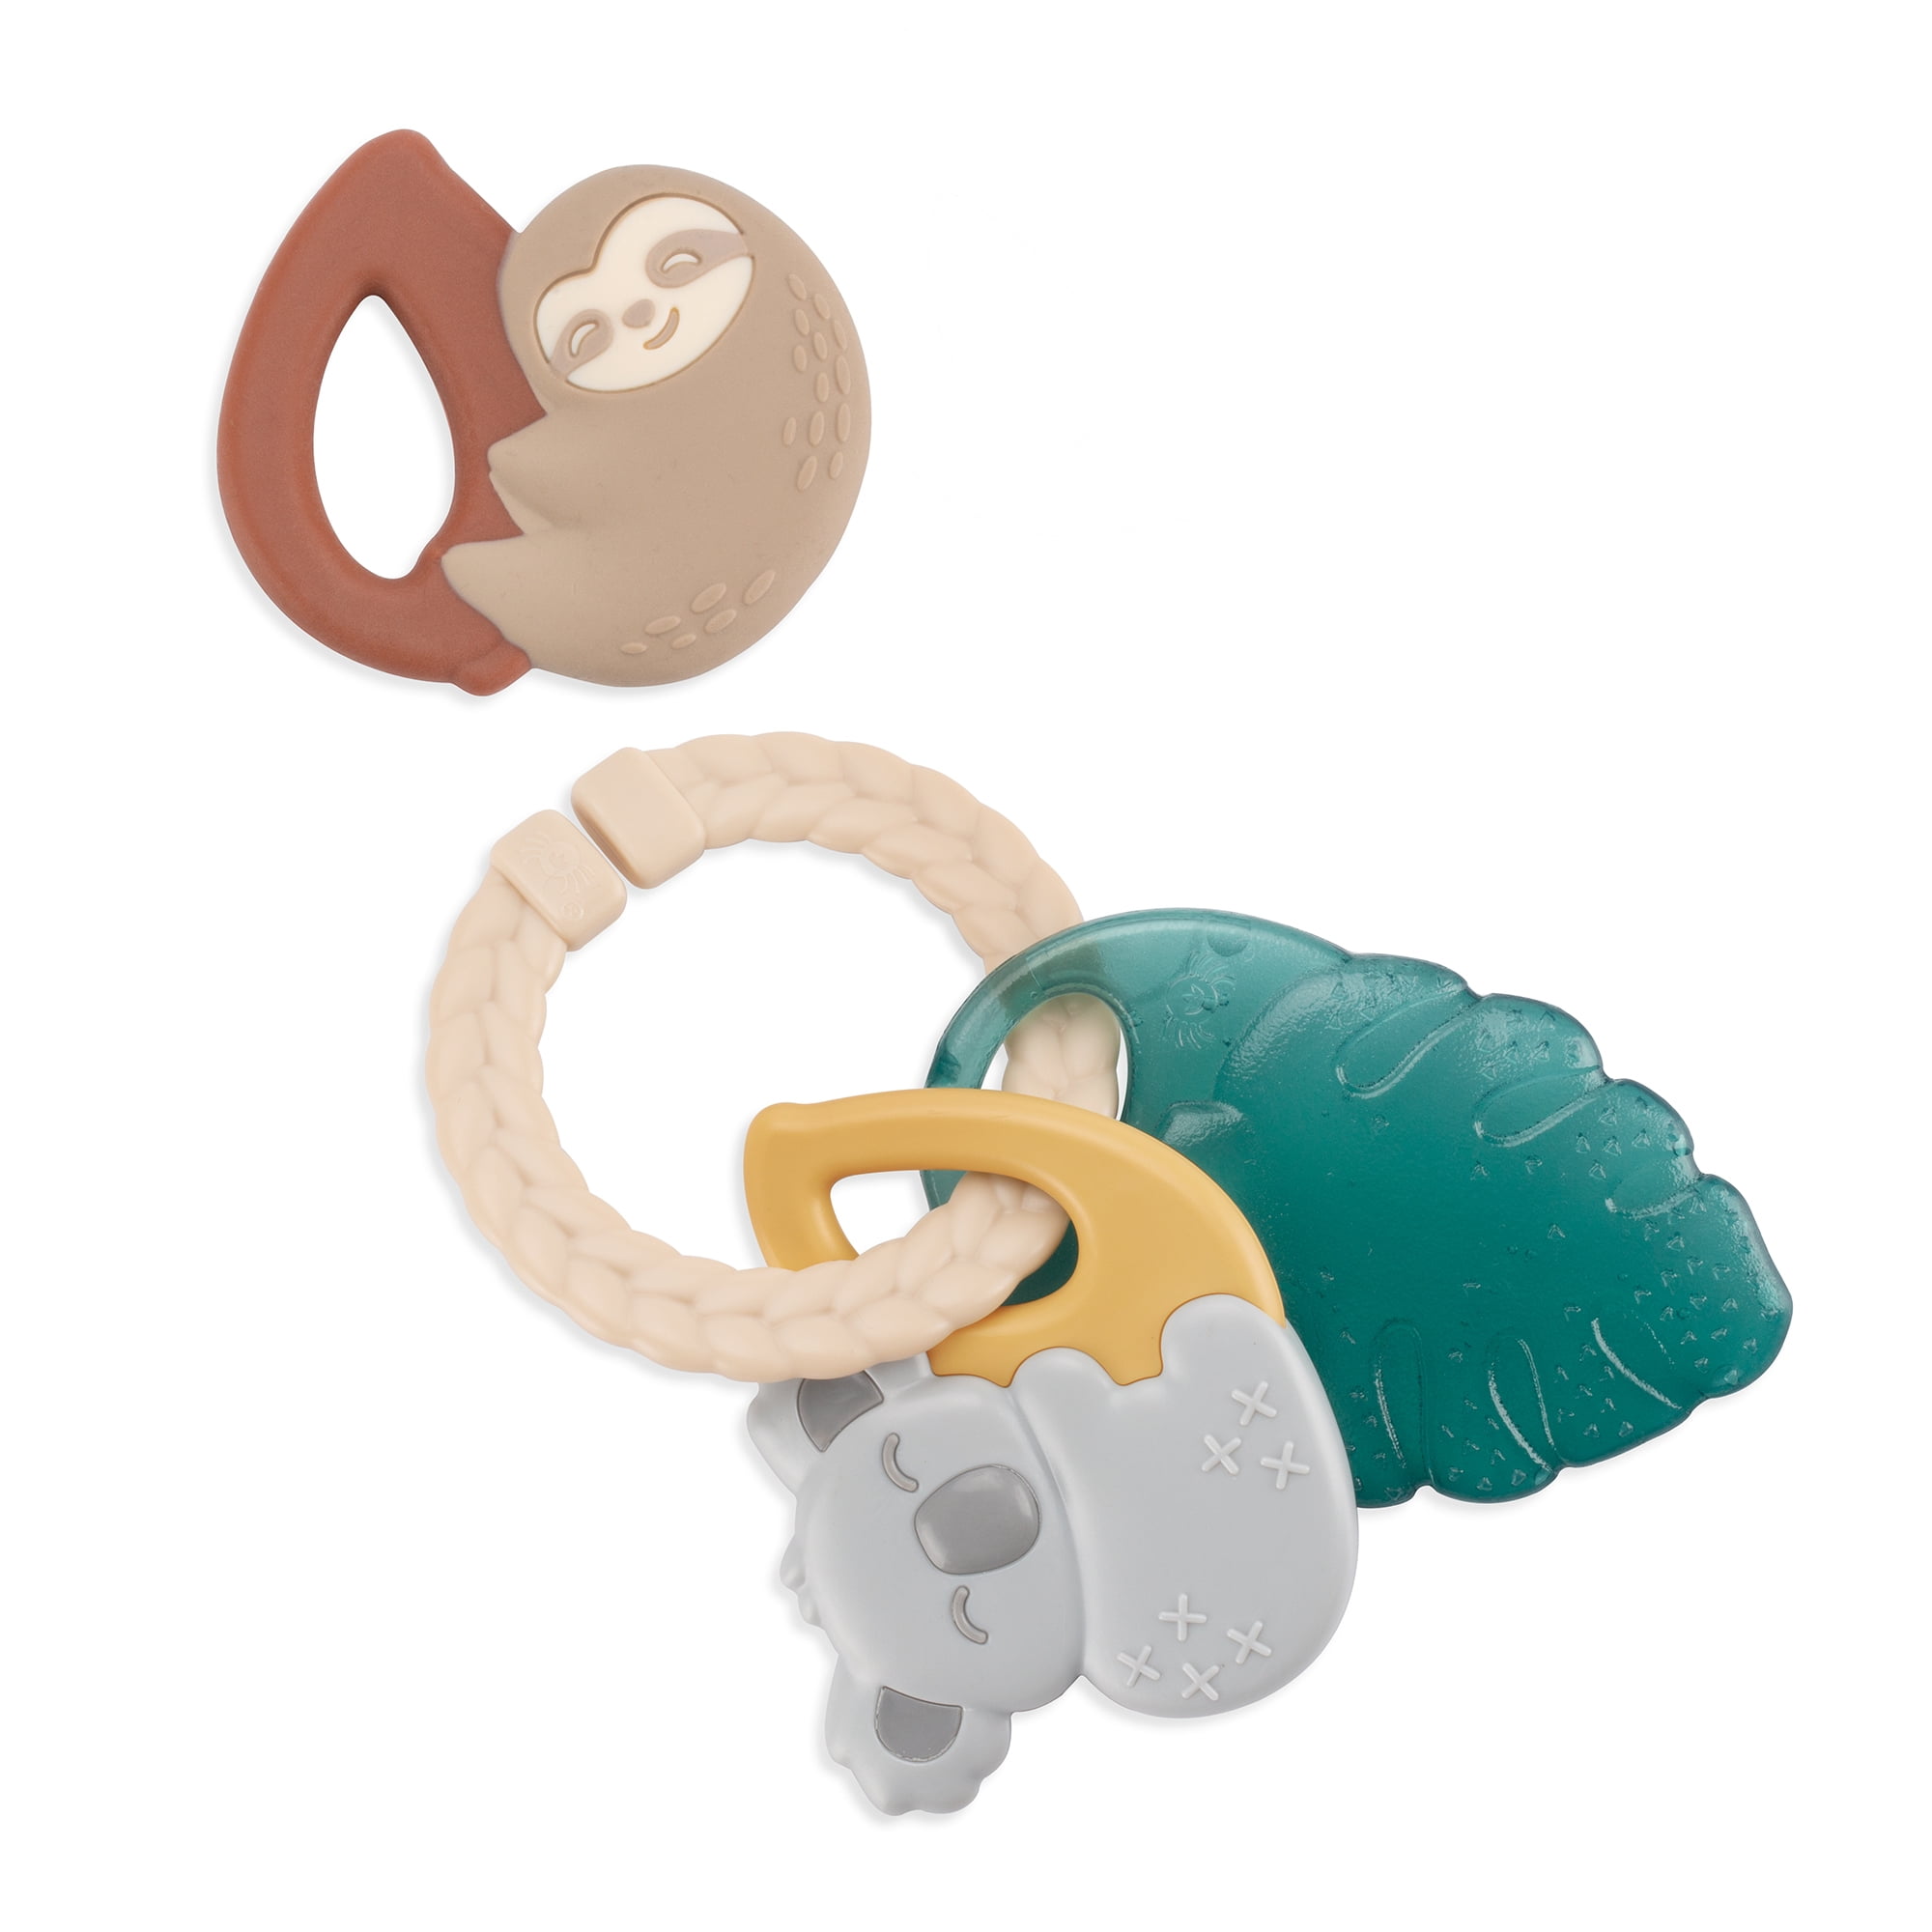 Itzy Ritzy Teething Keys - Feature A Braided Texture Ring & Keys with Mixed  Textures, Includes A Water-Filled Leaf, Silicone Sloth & Koala Teether Toy  - Walmart.com